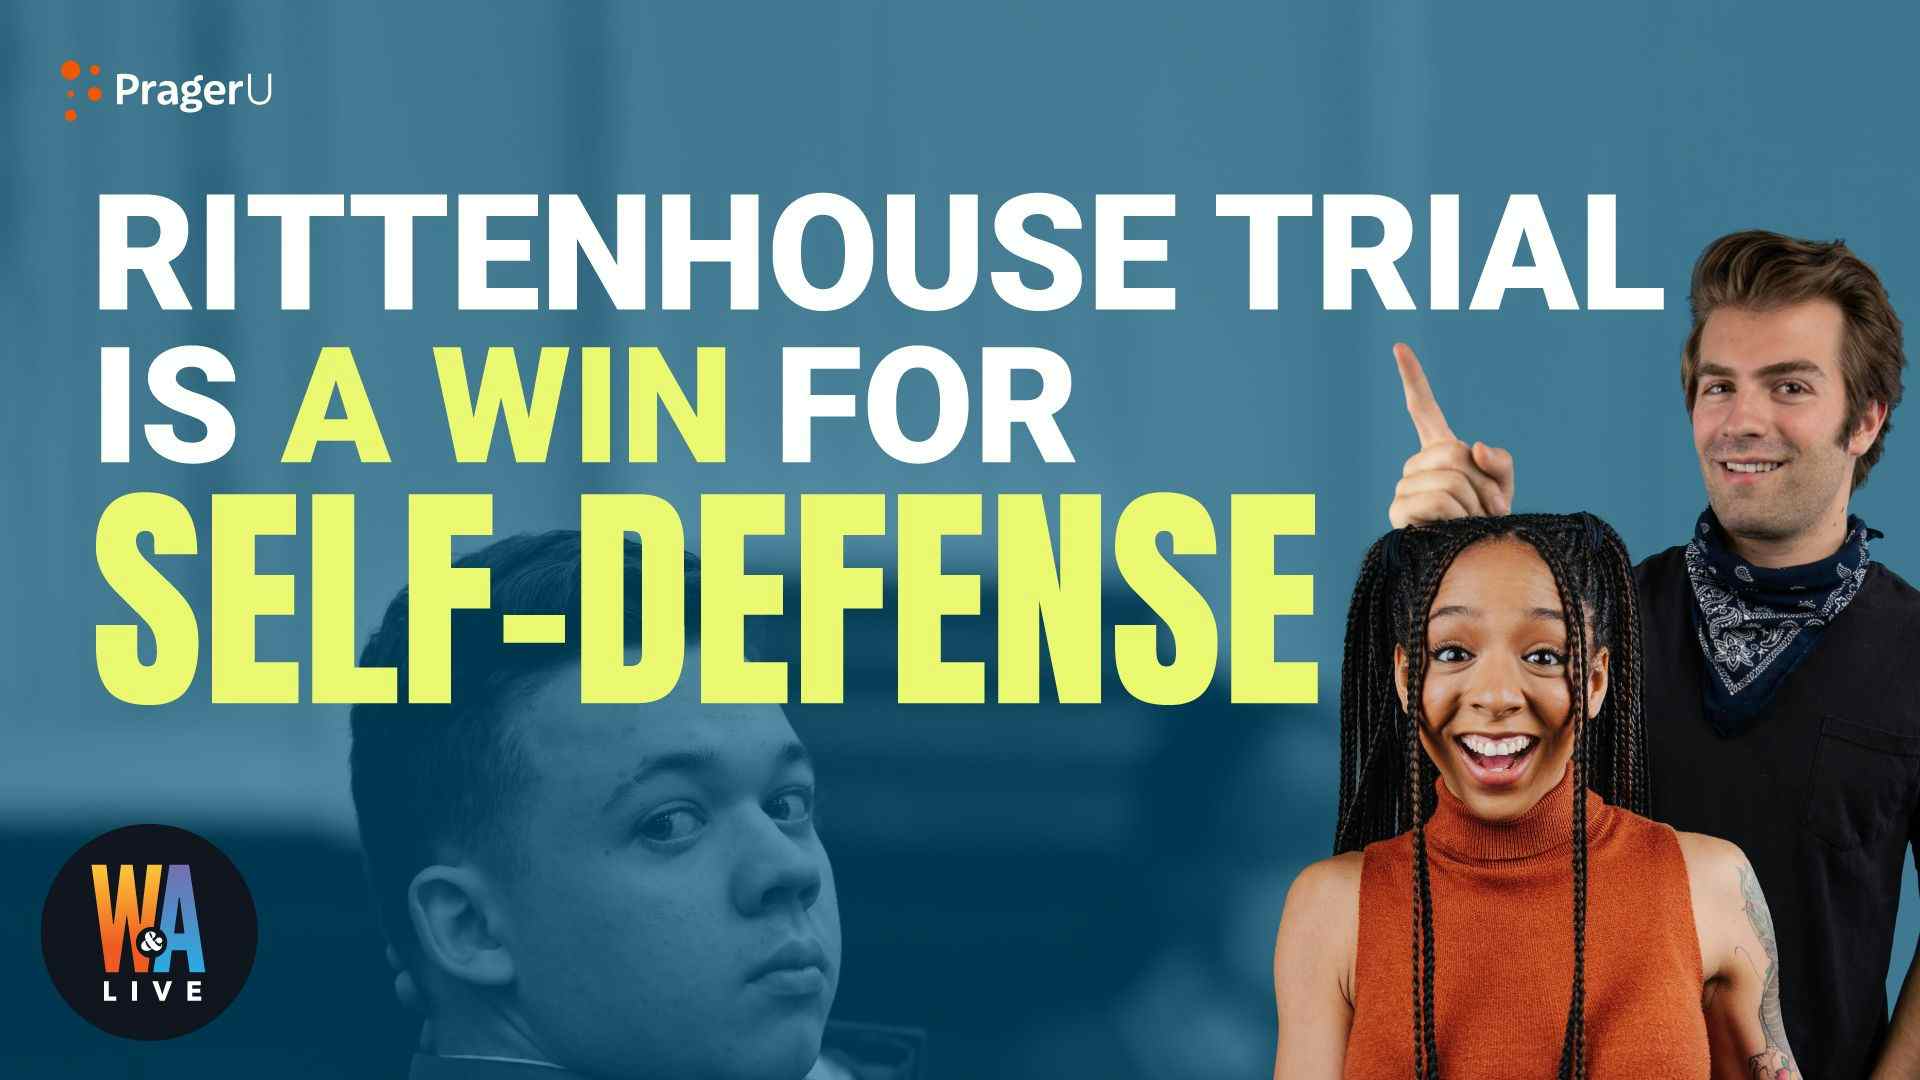 Rittenhouse Trial Is a Win for Self-Defense